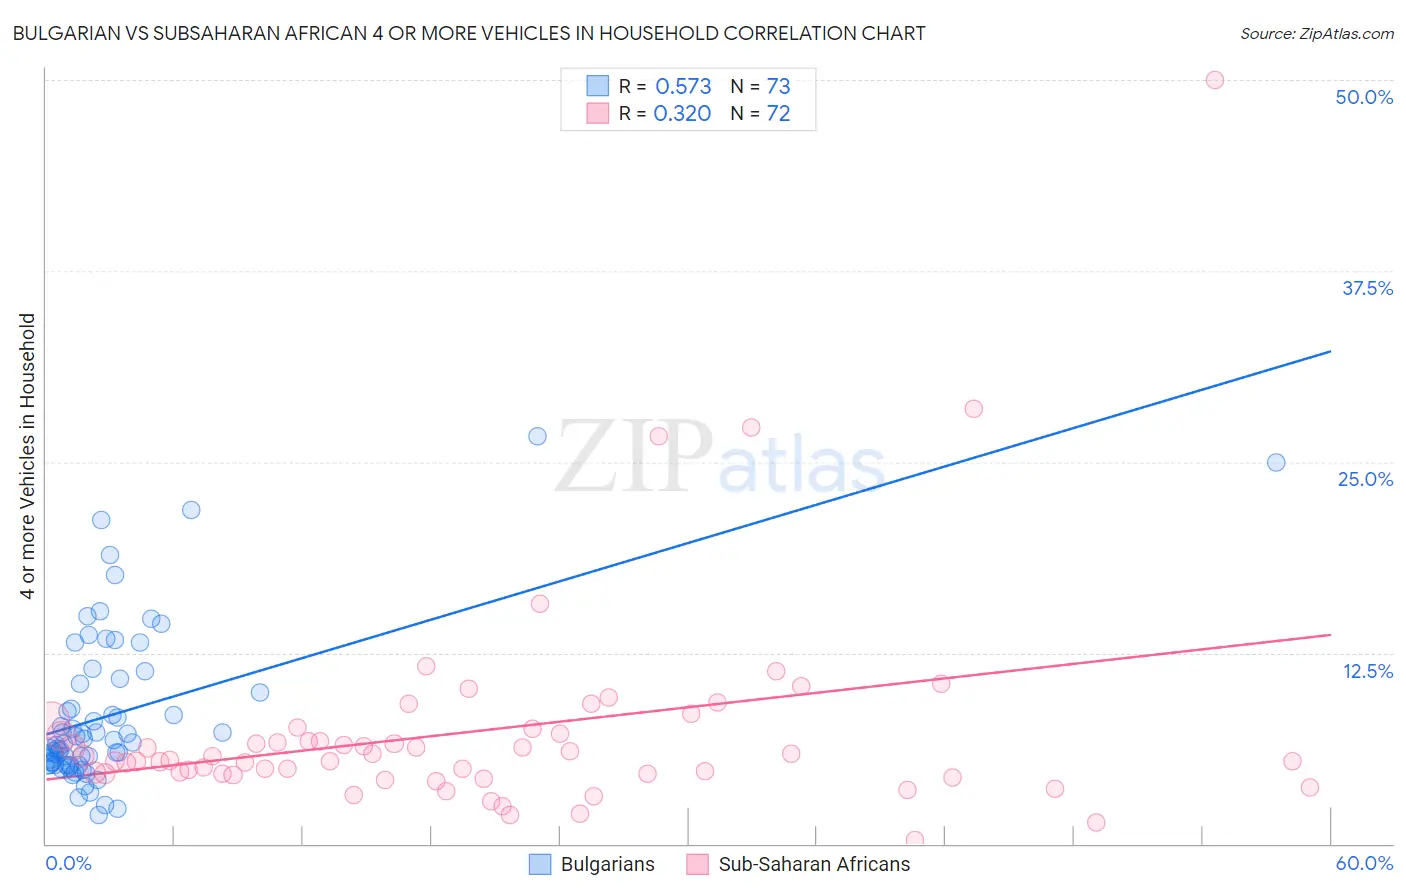 Bulgarian vs Subsaharan African 4 or more Vehicles in Household